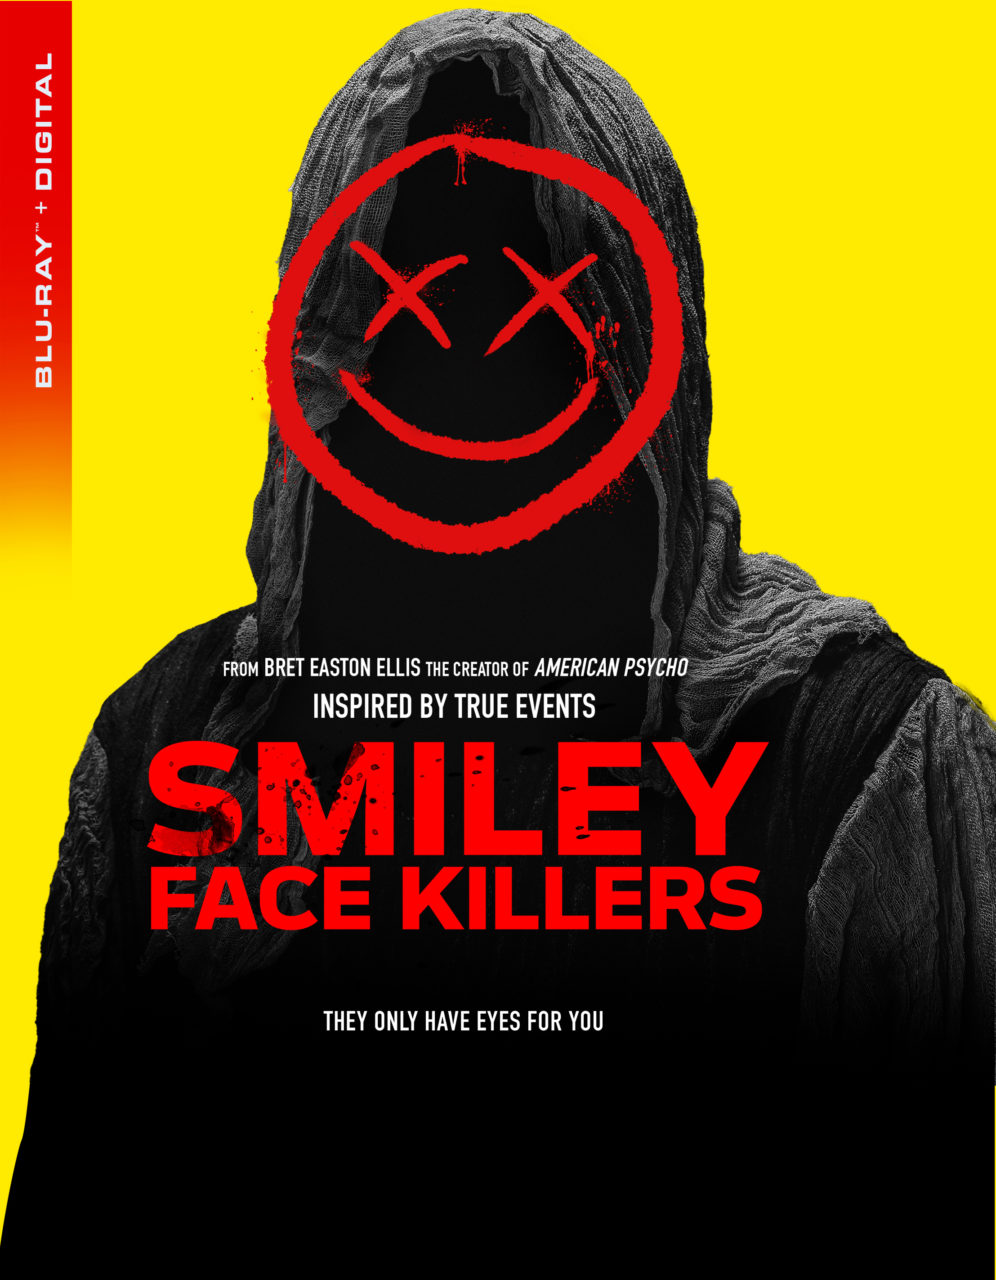 Smiley Face Killers Blu-Ray Combo pack cover (Lionsgate Home Entertainment)